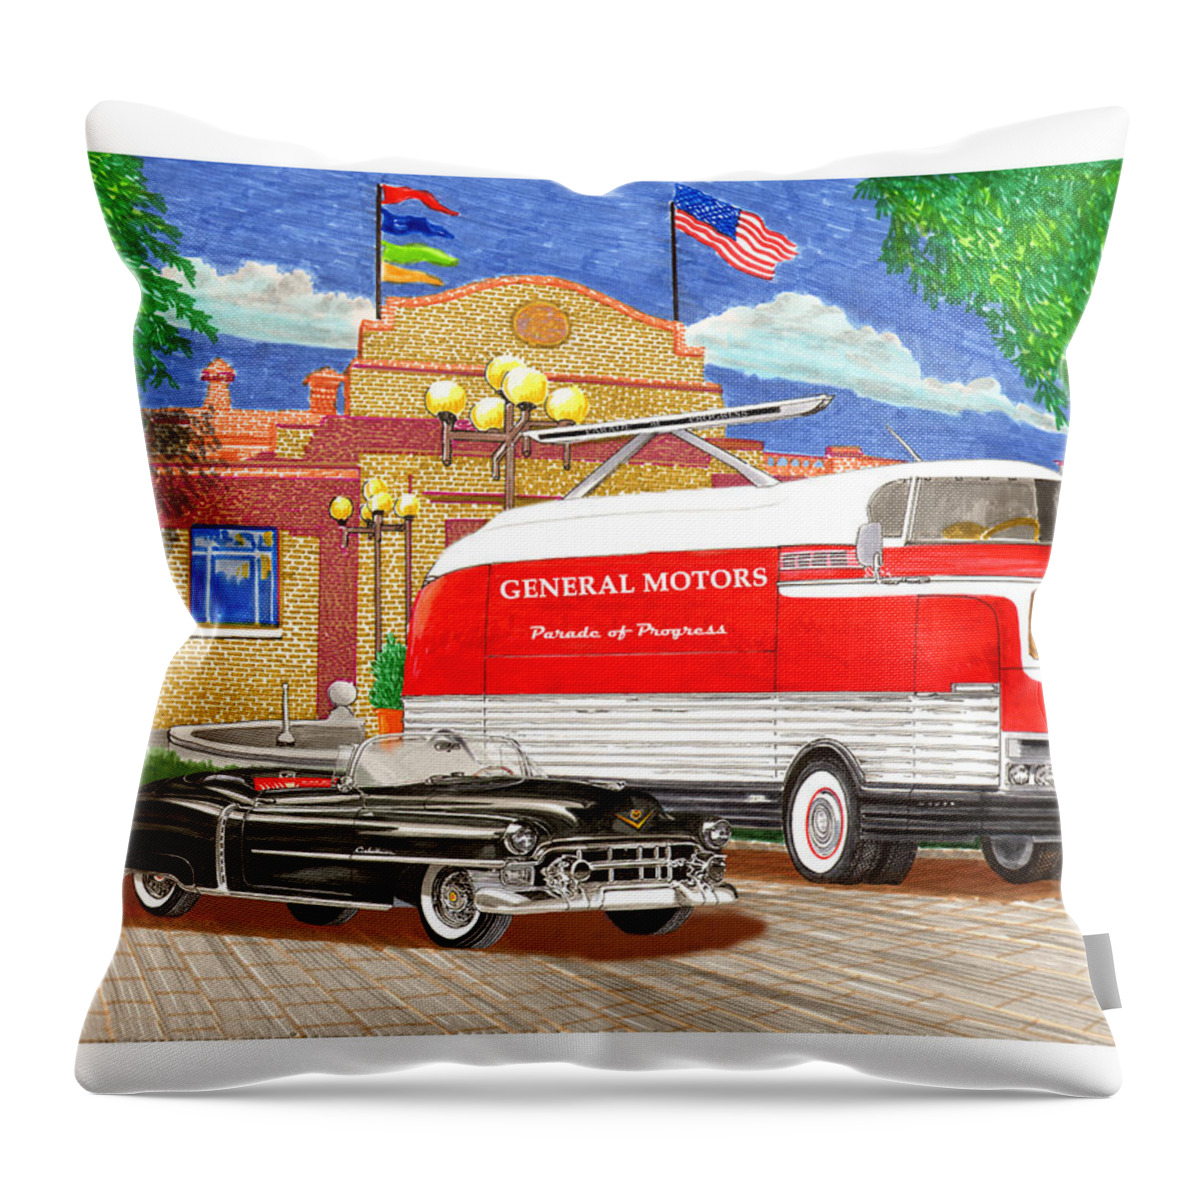 Framed Art Prints Of 1953 General Motors Parade Of Progress Custom Bus Throw Pillow featuring the painting Motorama General Motors mobile showroom on tour by Jack Pumphrey